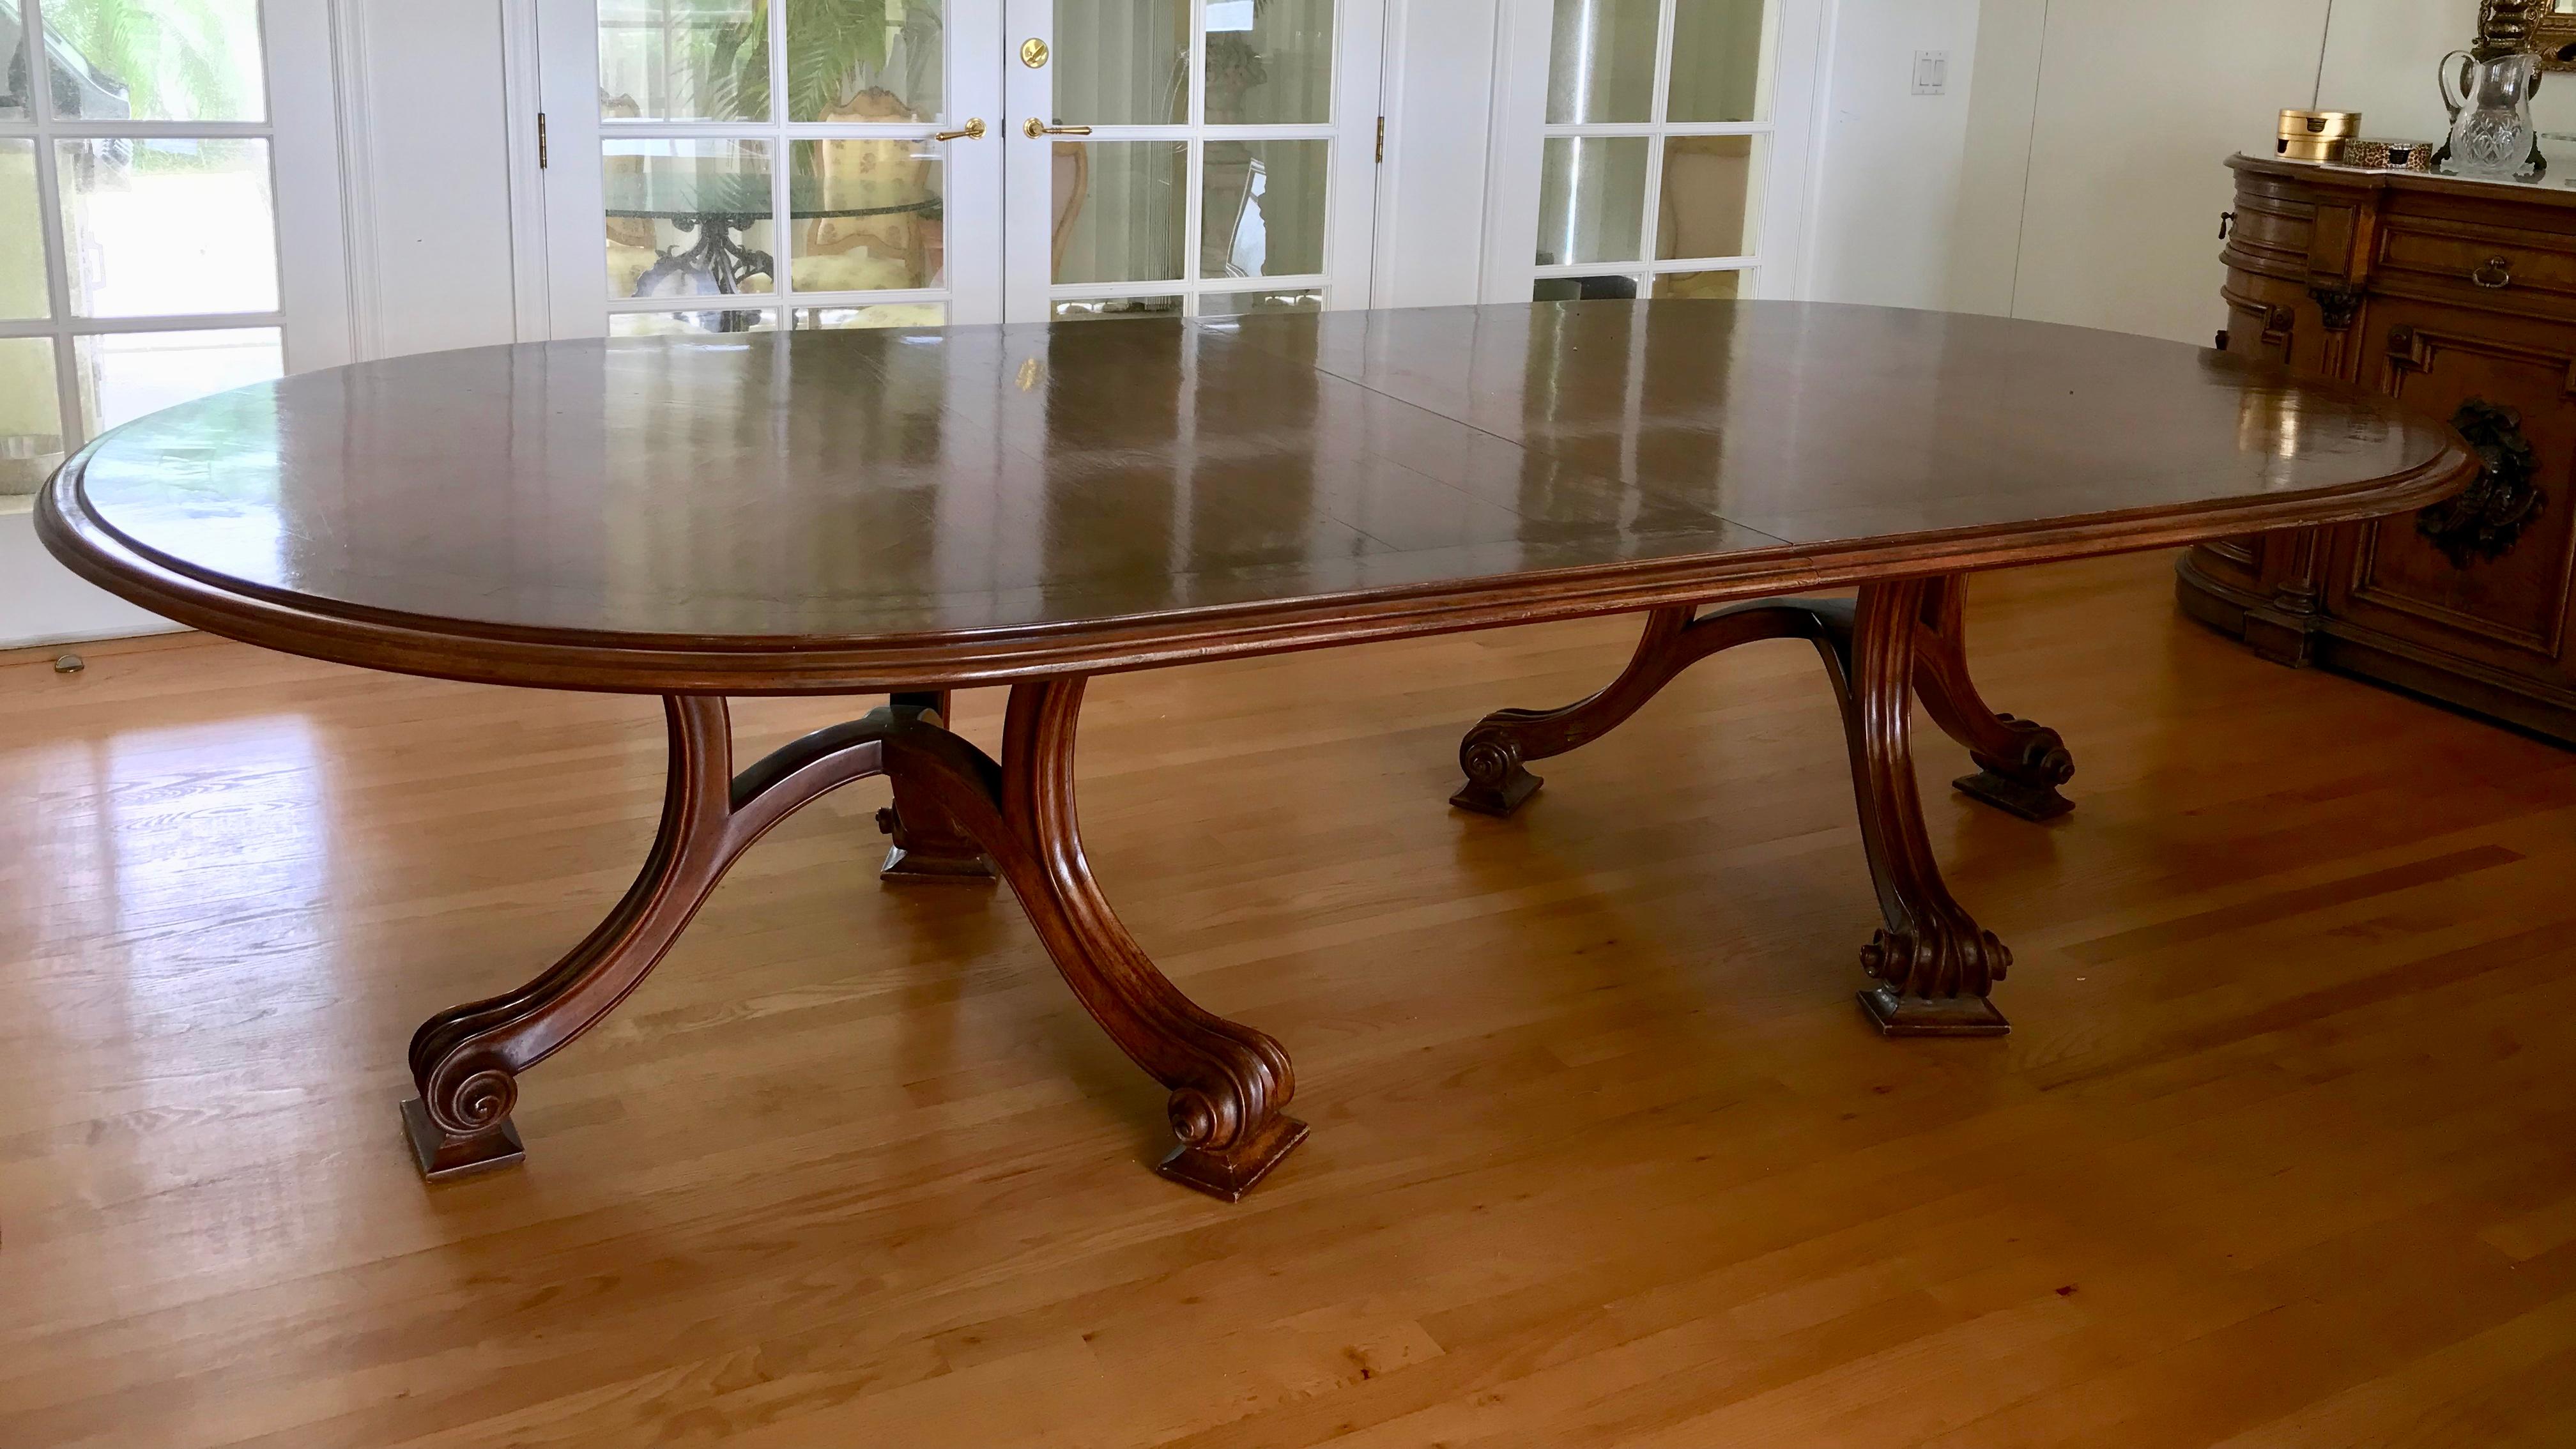 This is a custom dining table of magnificent proportions and quality details.
It is complemented with generously scaled leaves.
The Therien Studio Workshops is one of the most sought after and finest in the country.
The table is 10 feet long